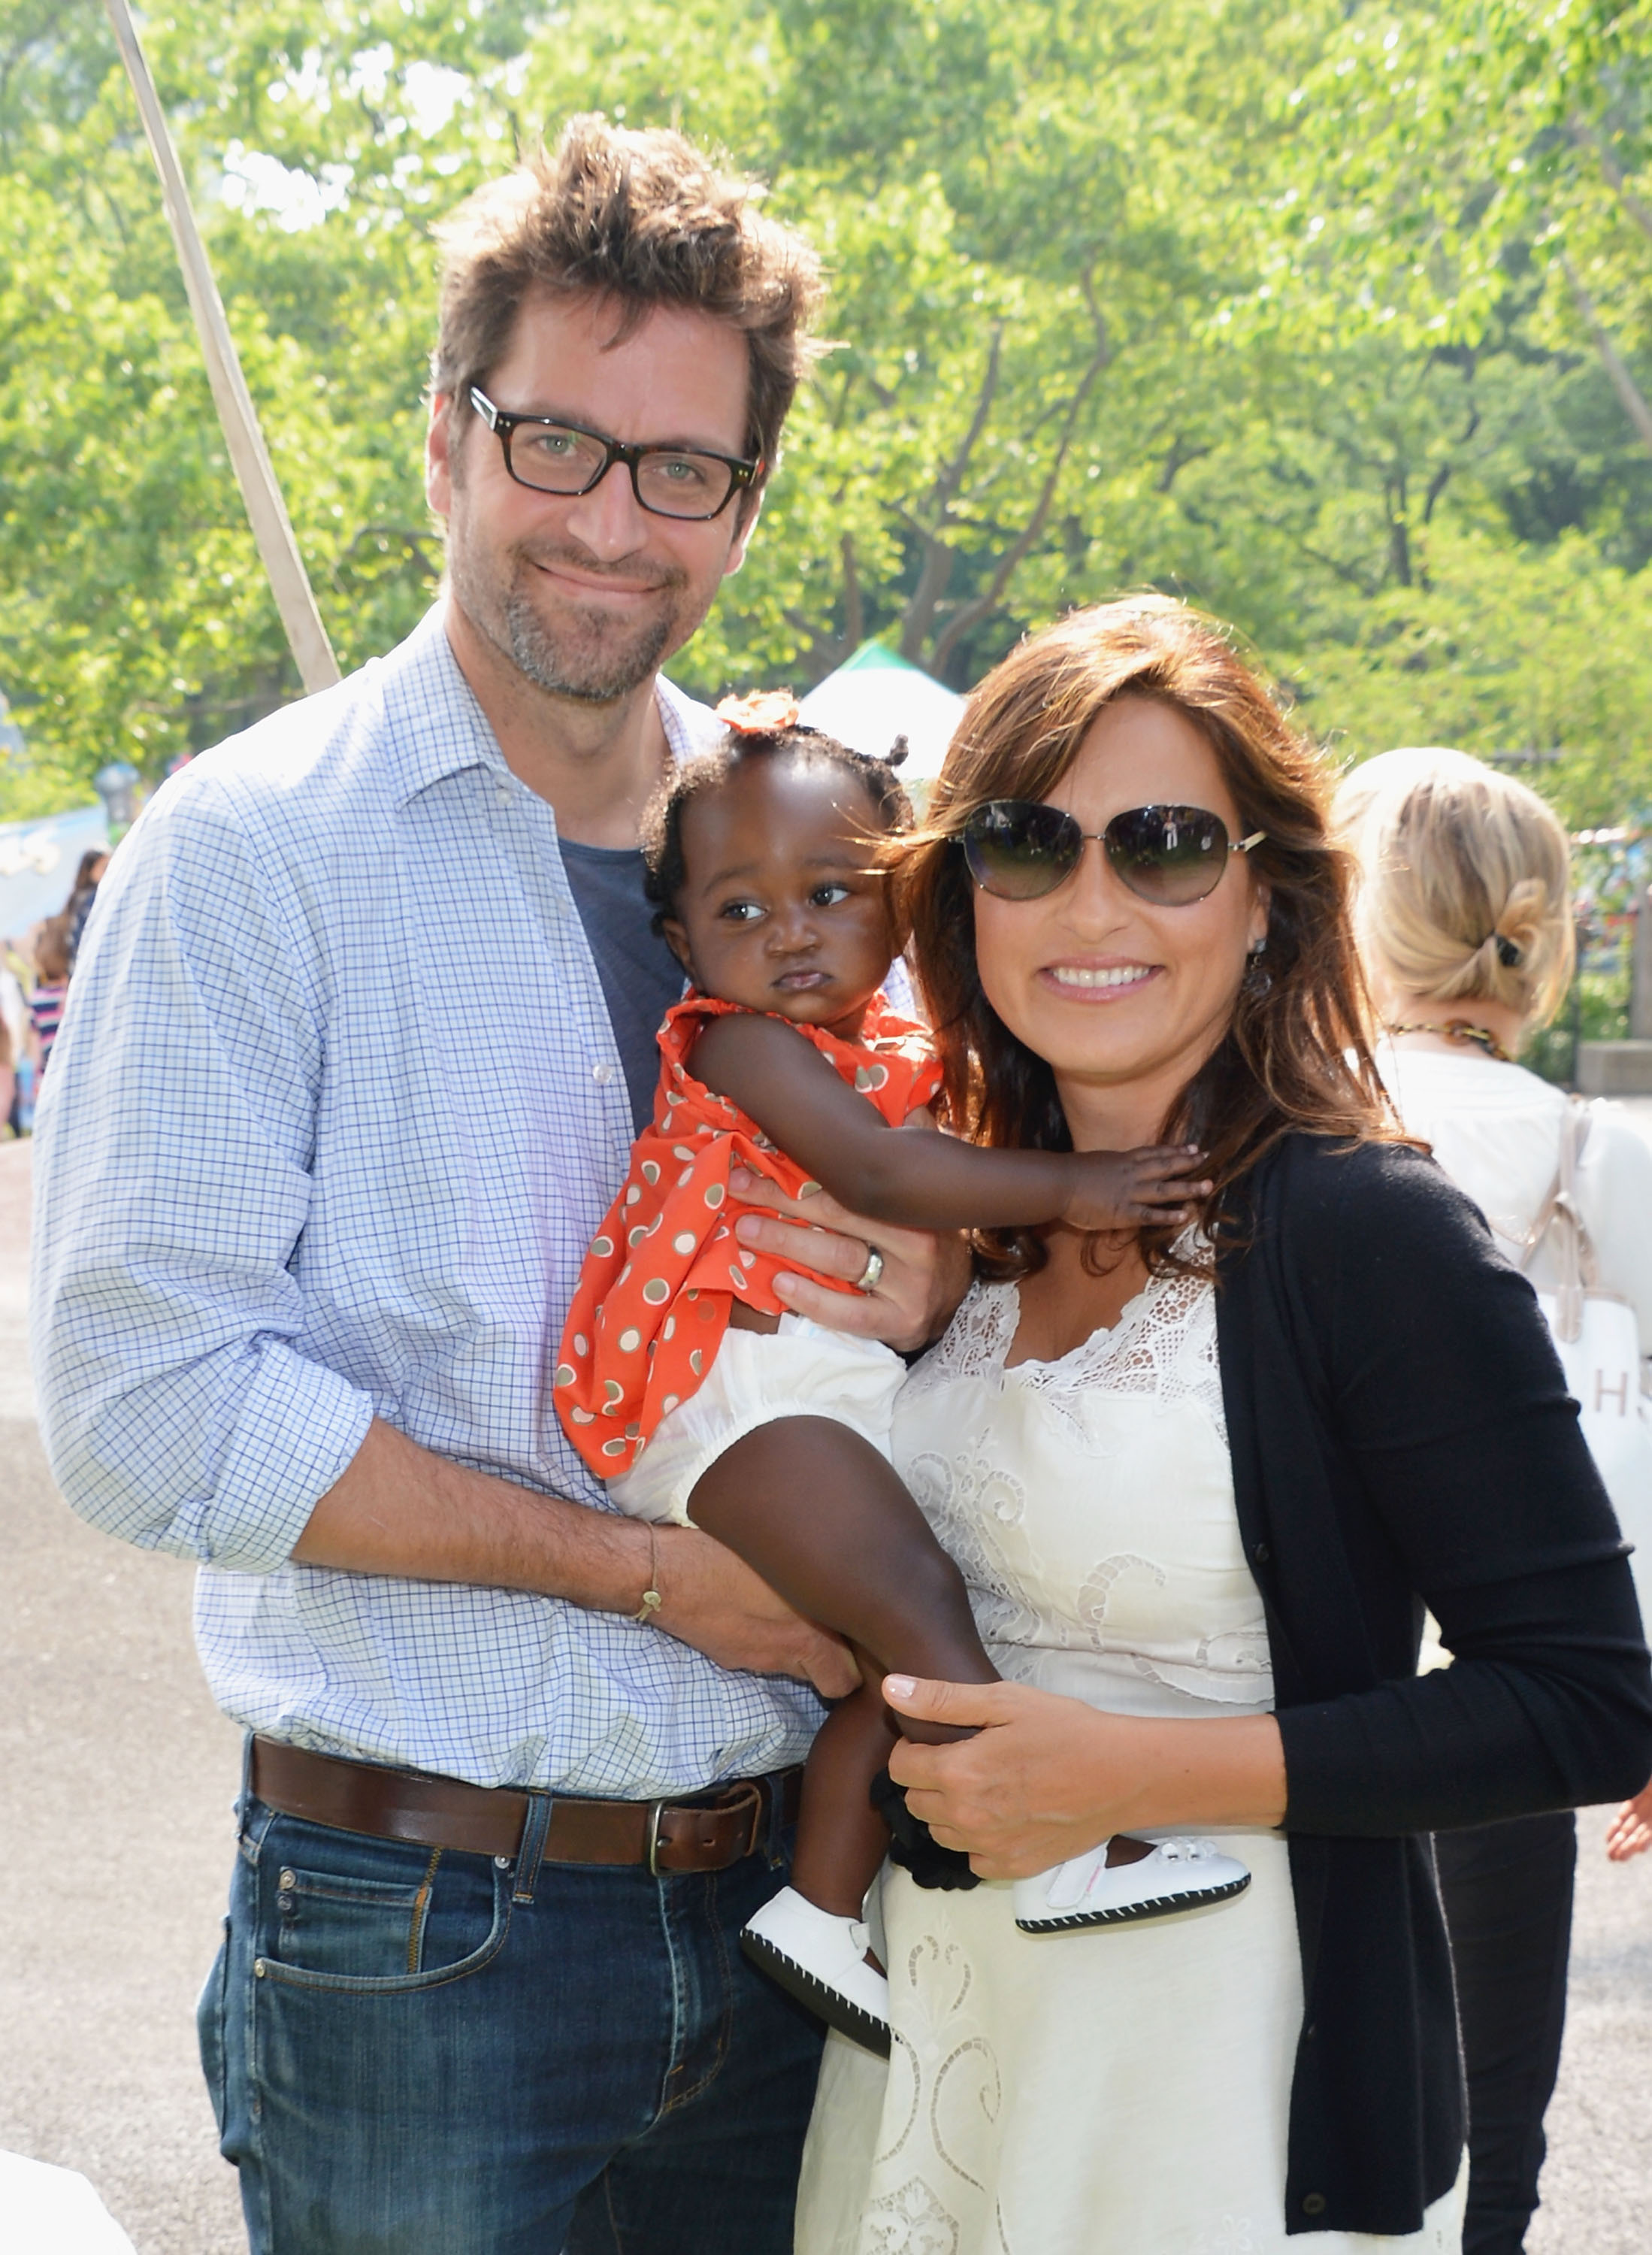 Peter Hermann, Amaya Josephine Hermann, and Mariska Hargitay at the 20th Annual Playground Partners Family Party in New York City, 2012 | Source: Getty Images